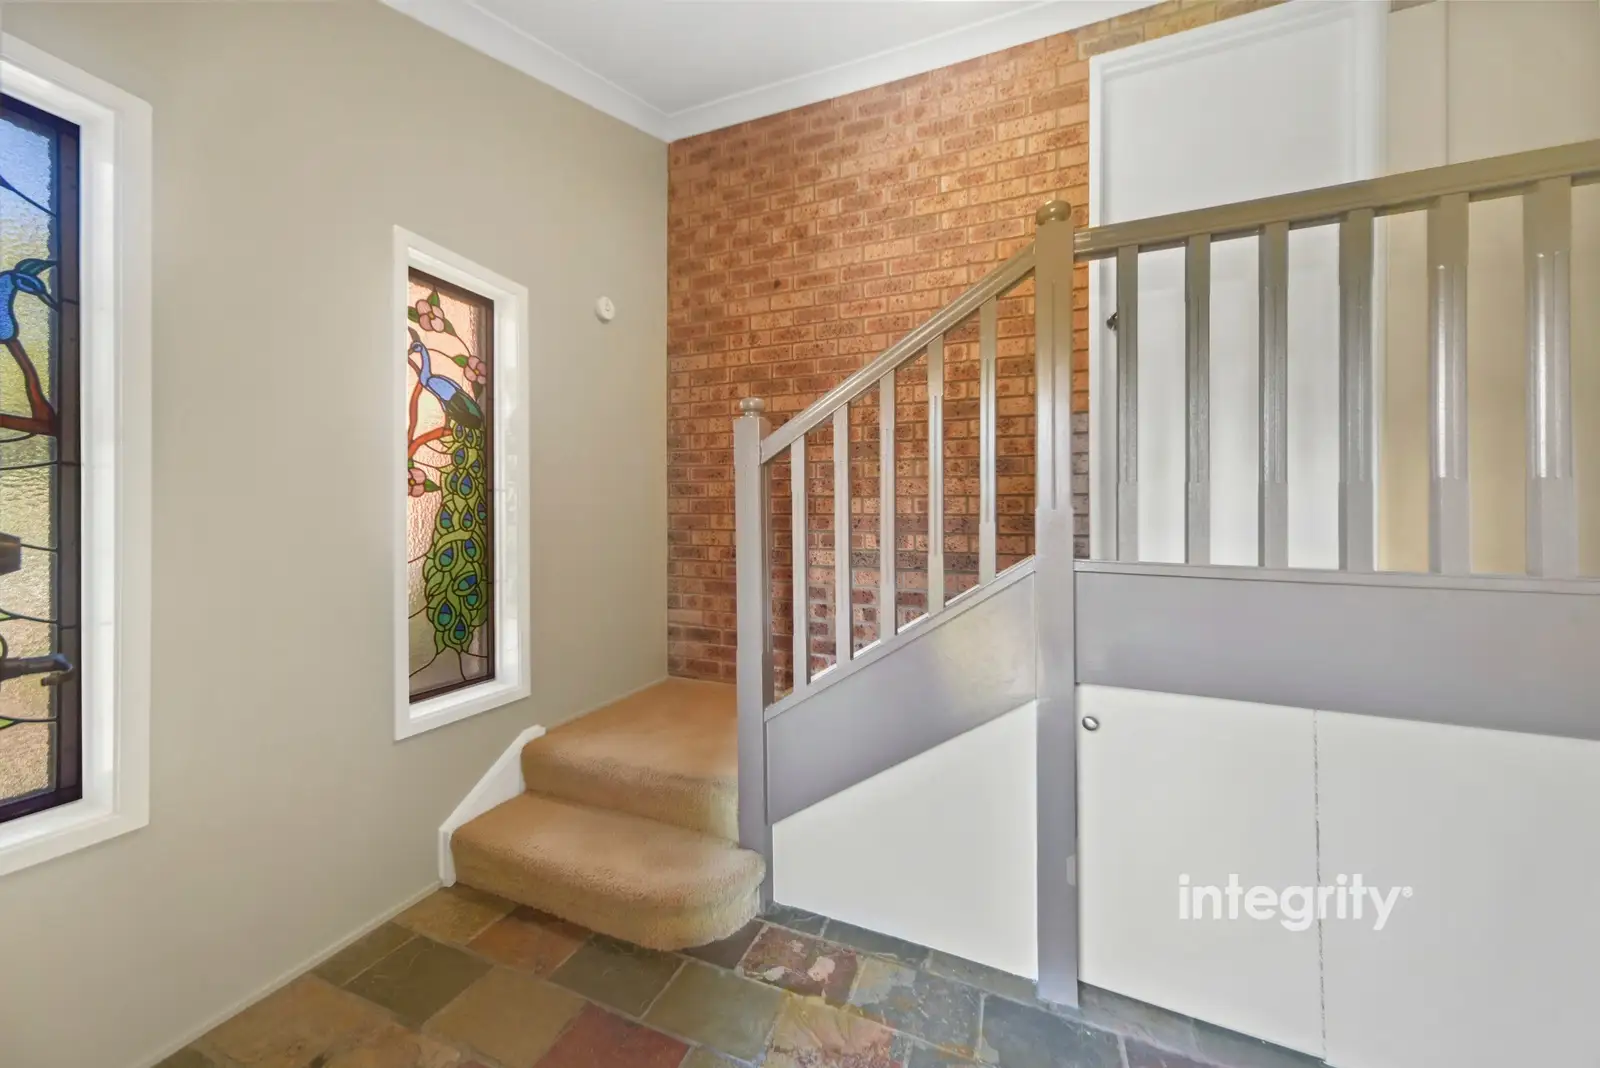 19 Jamieson Road, North Nowra For Sale by Integrity Real Estate - image 3